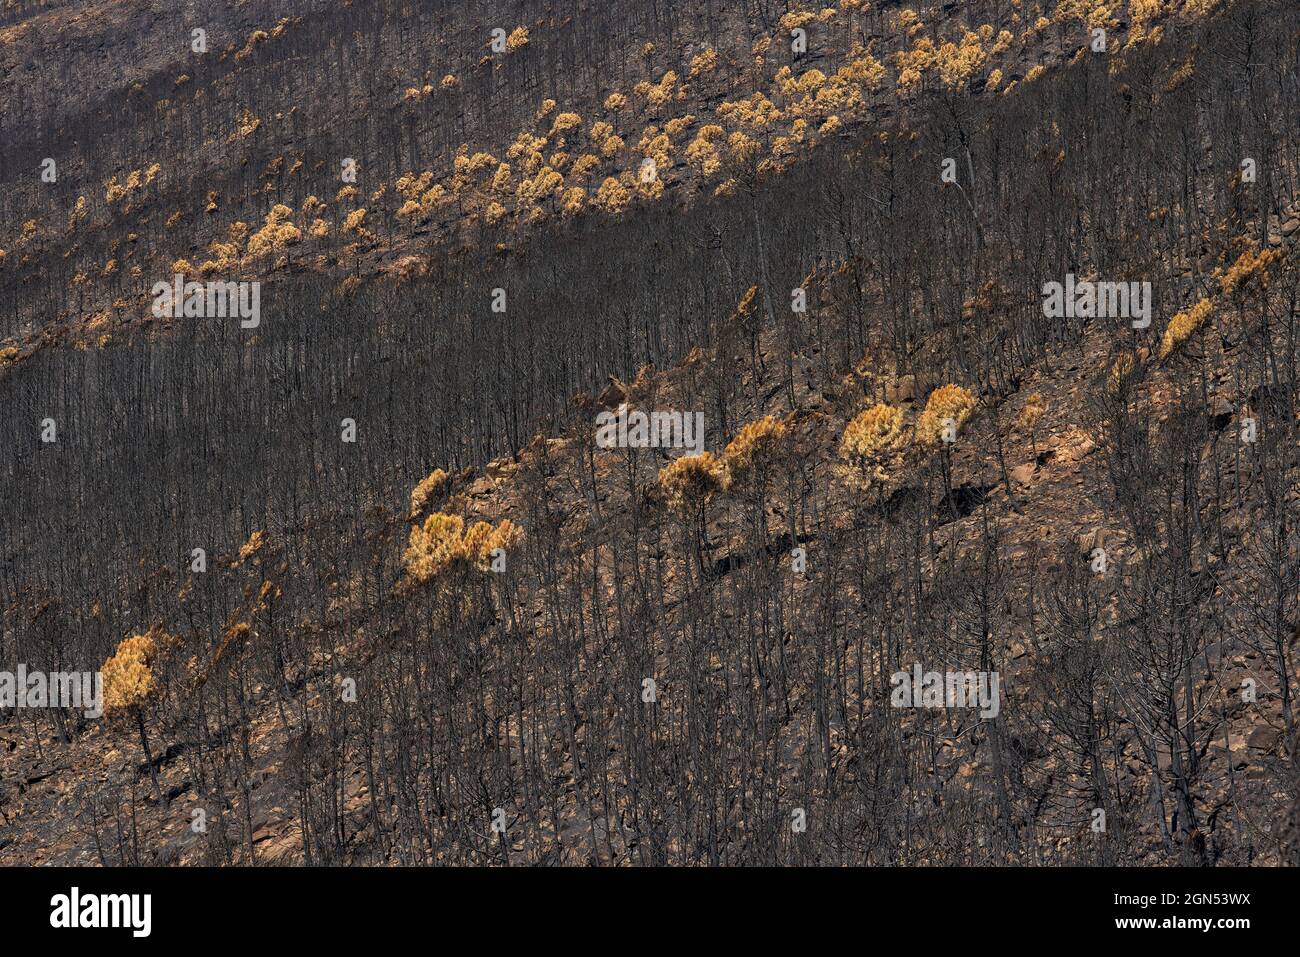 Fire in Jubrique, border with Sierra Bermeja in the Genal Valley, Malaga. Andalusia, Spain. September 2021 Stock Photo